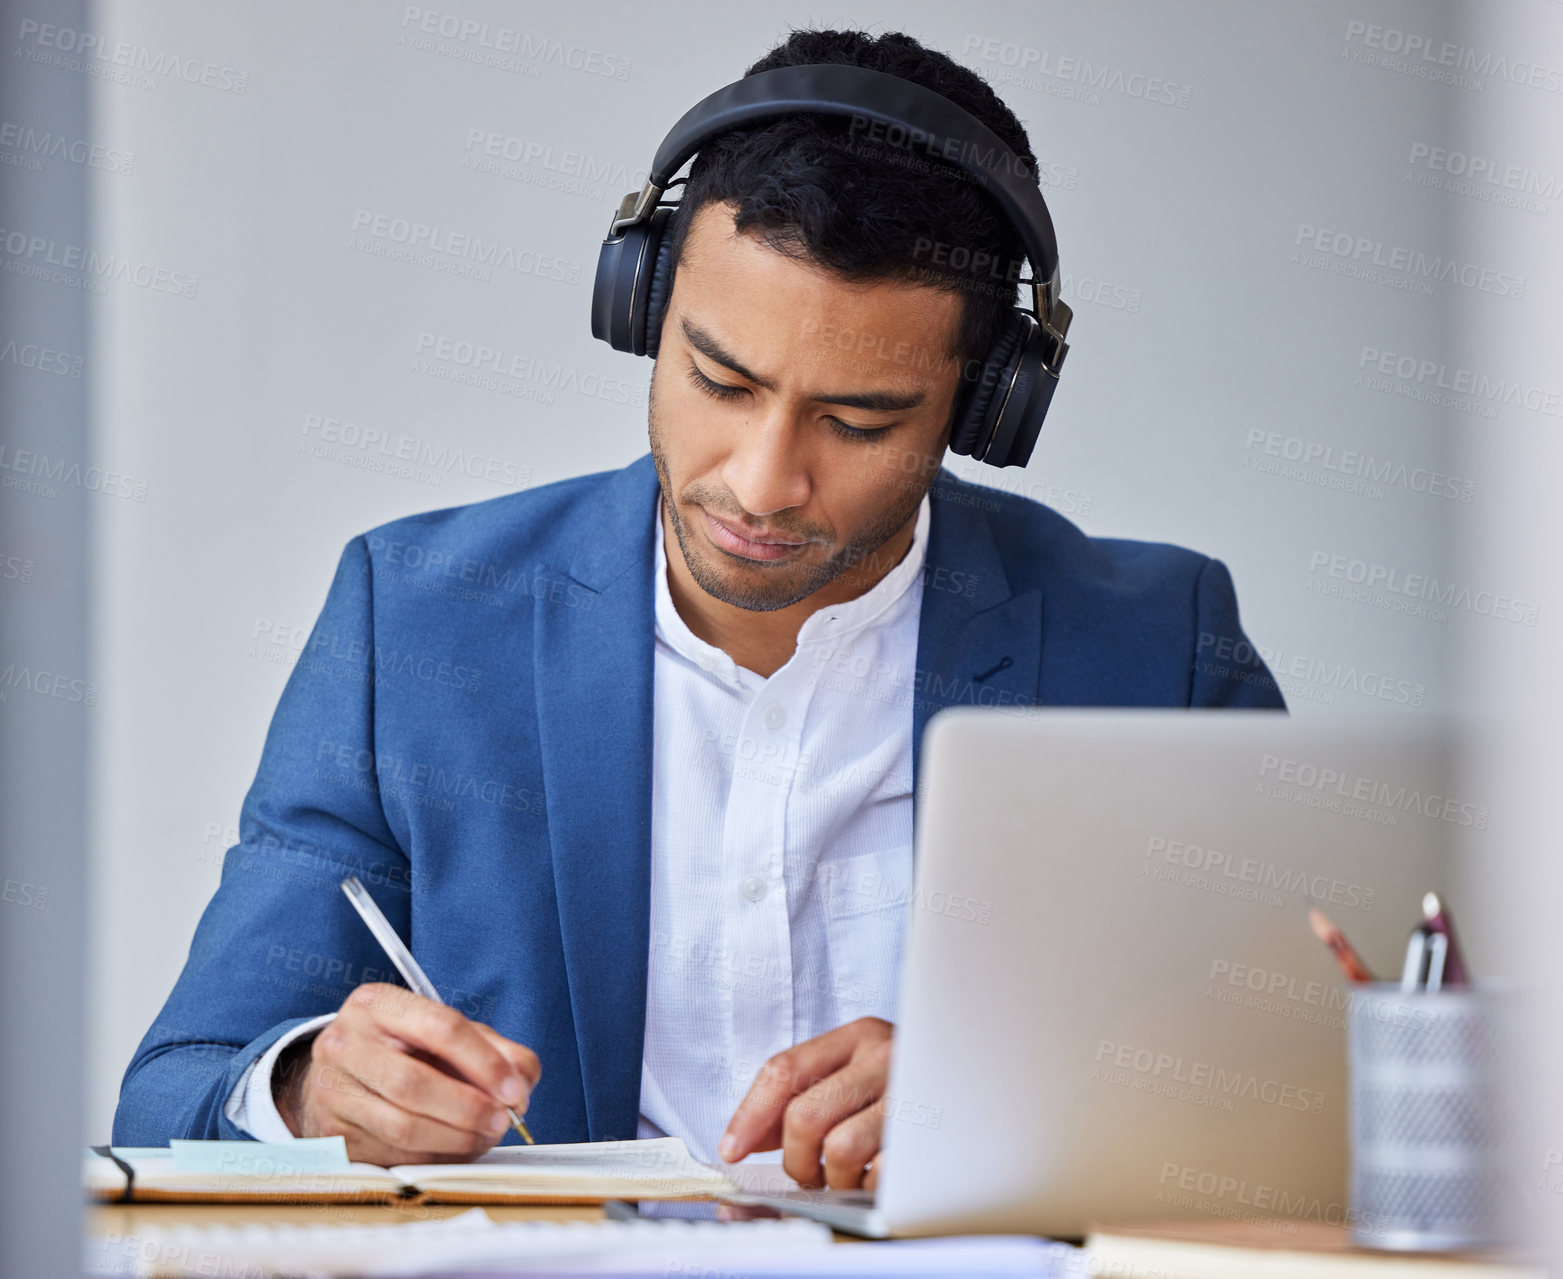 Buy stock photo Shot of a young businessman taking notes while using his laptop